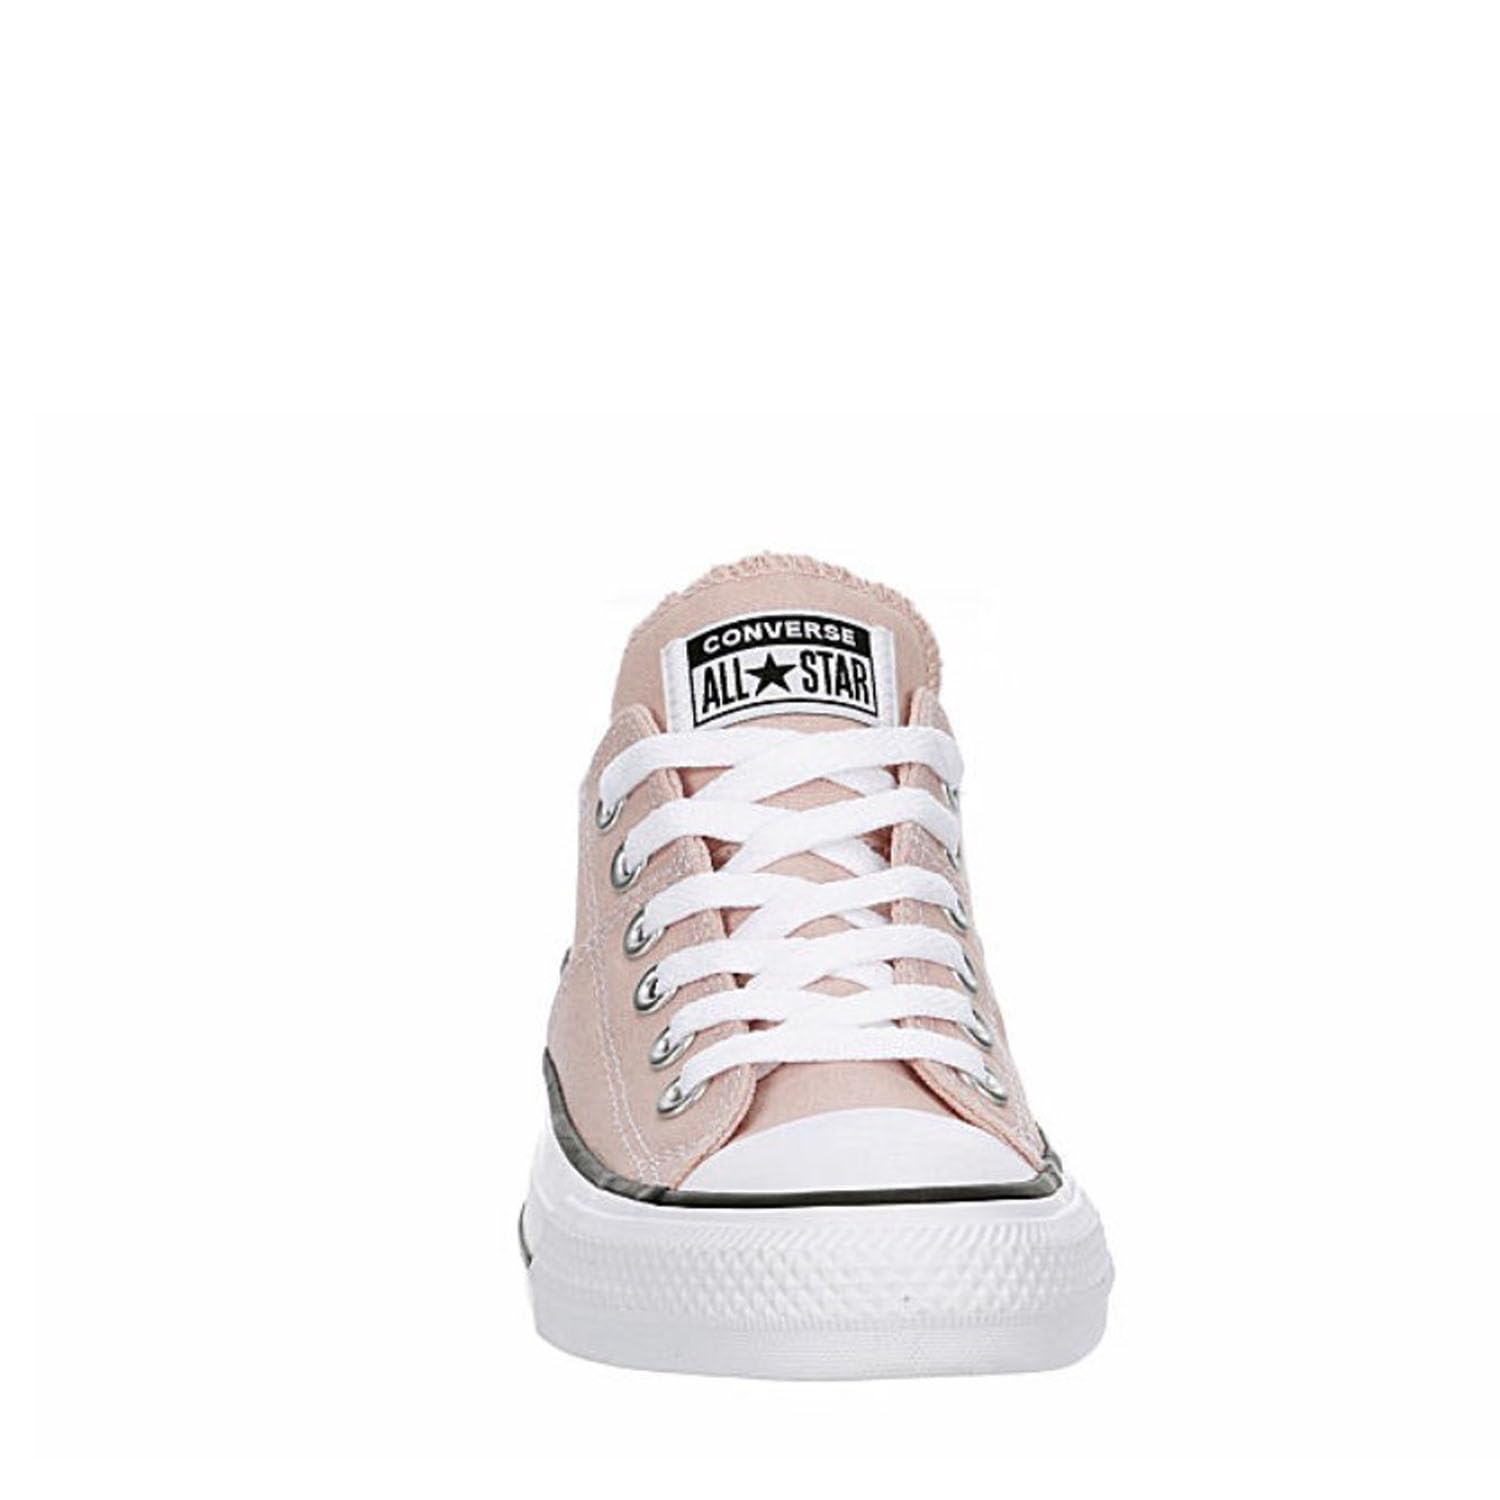 Converse Unisex Chuck Taylor All Star Madison Ox Canvas Sneaker - Lace up Closure Style - Pink Sage/White/Black